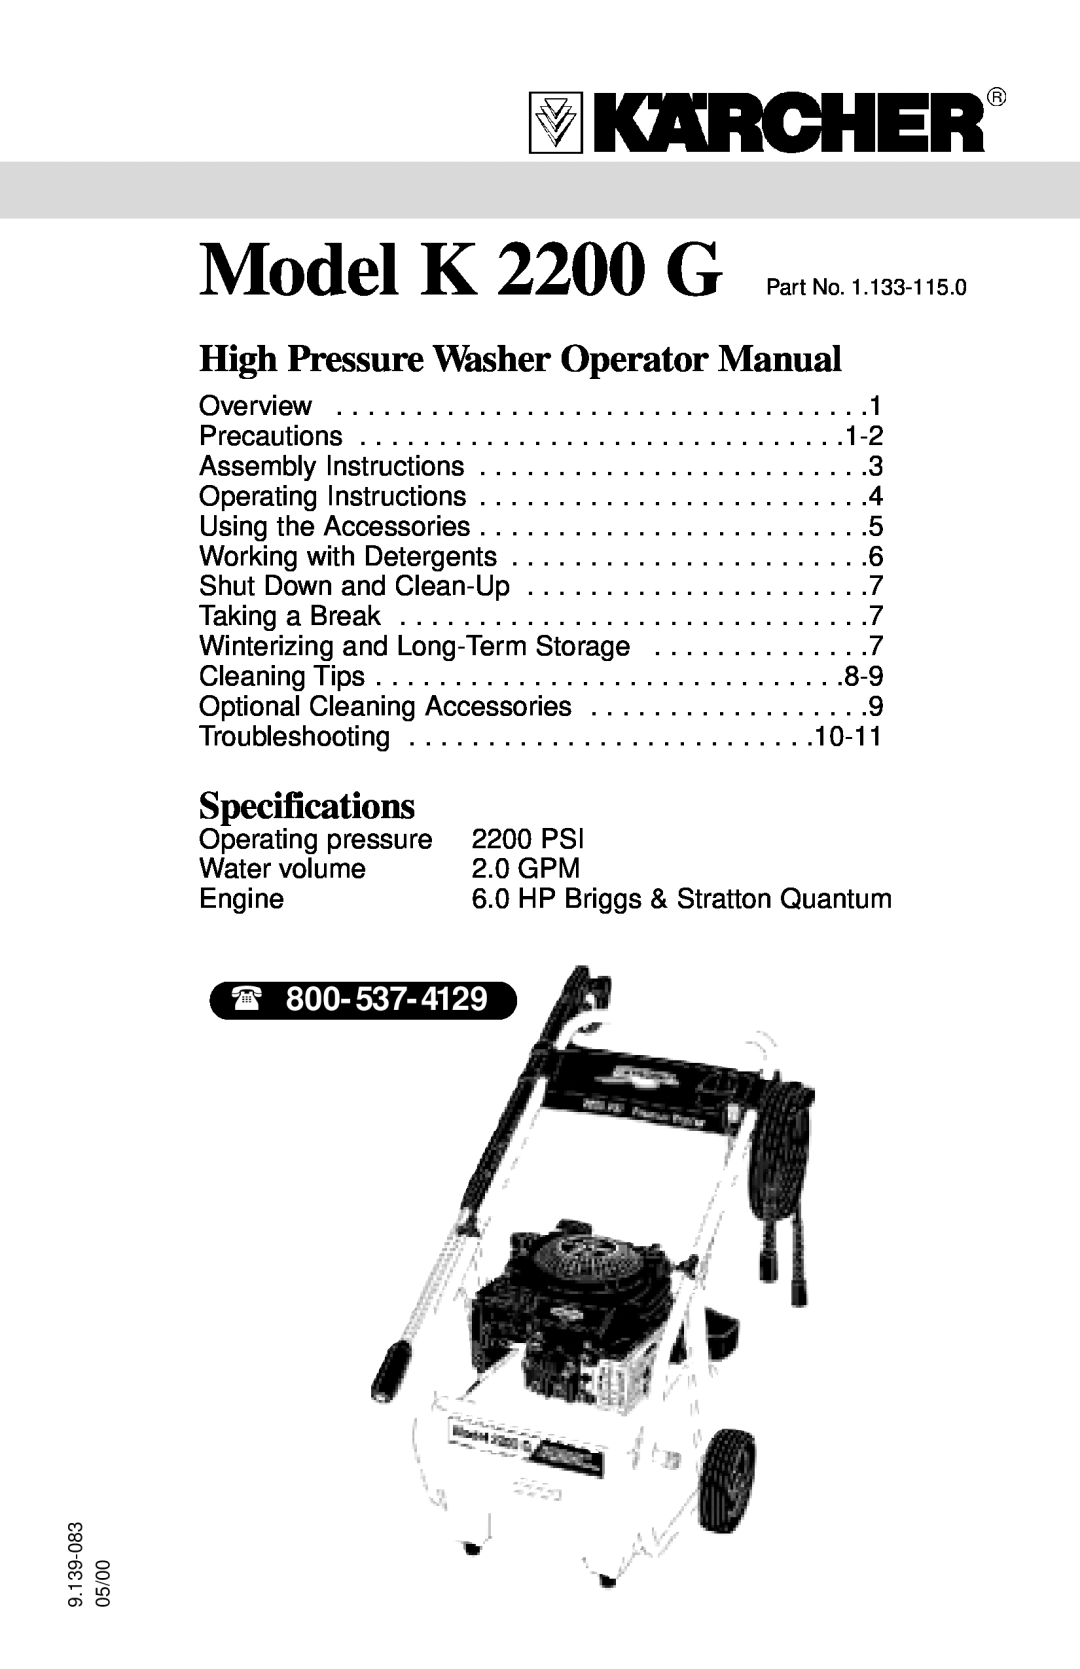 Karcher K 2200 G specifications 800- 537, High Pressure Washer Operator Manual, Specifications 